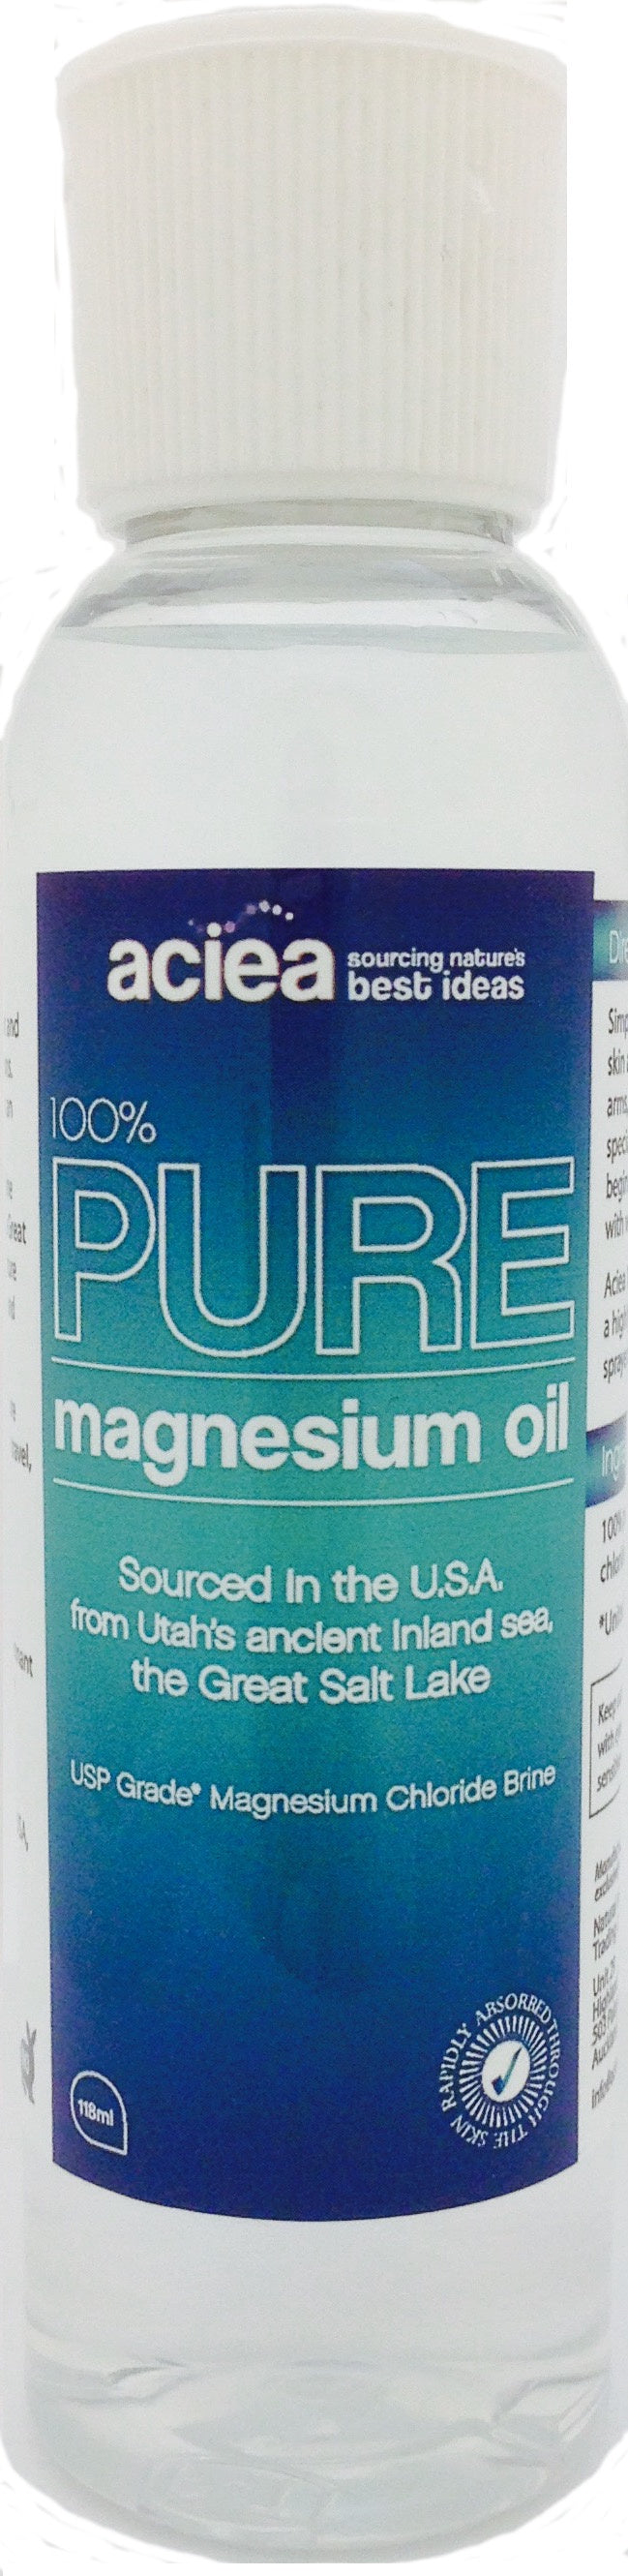 NHT 100% Pure Magnesium Oil